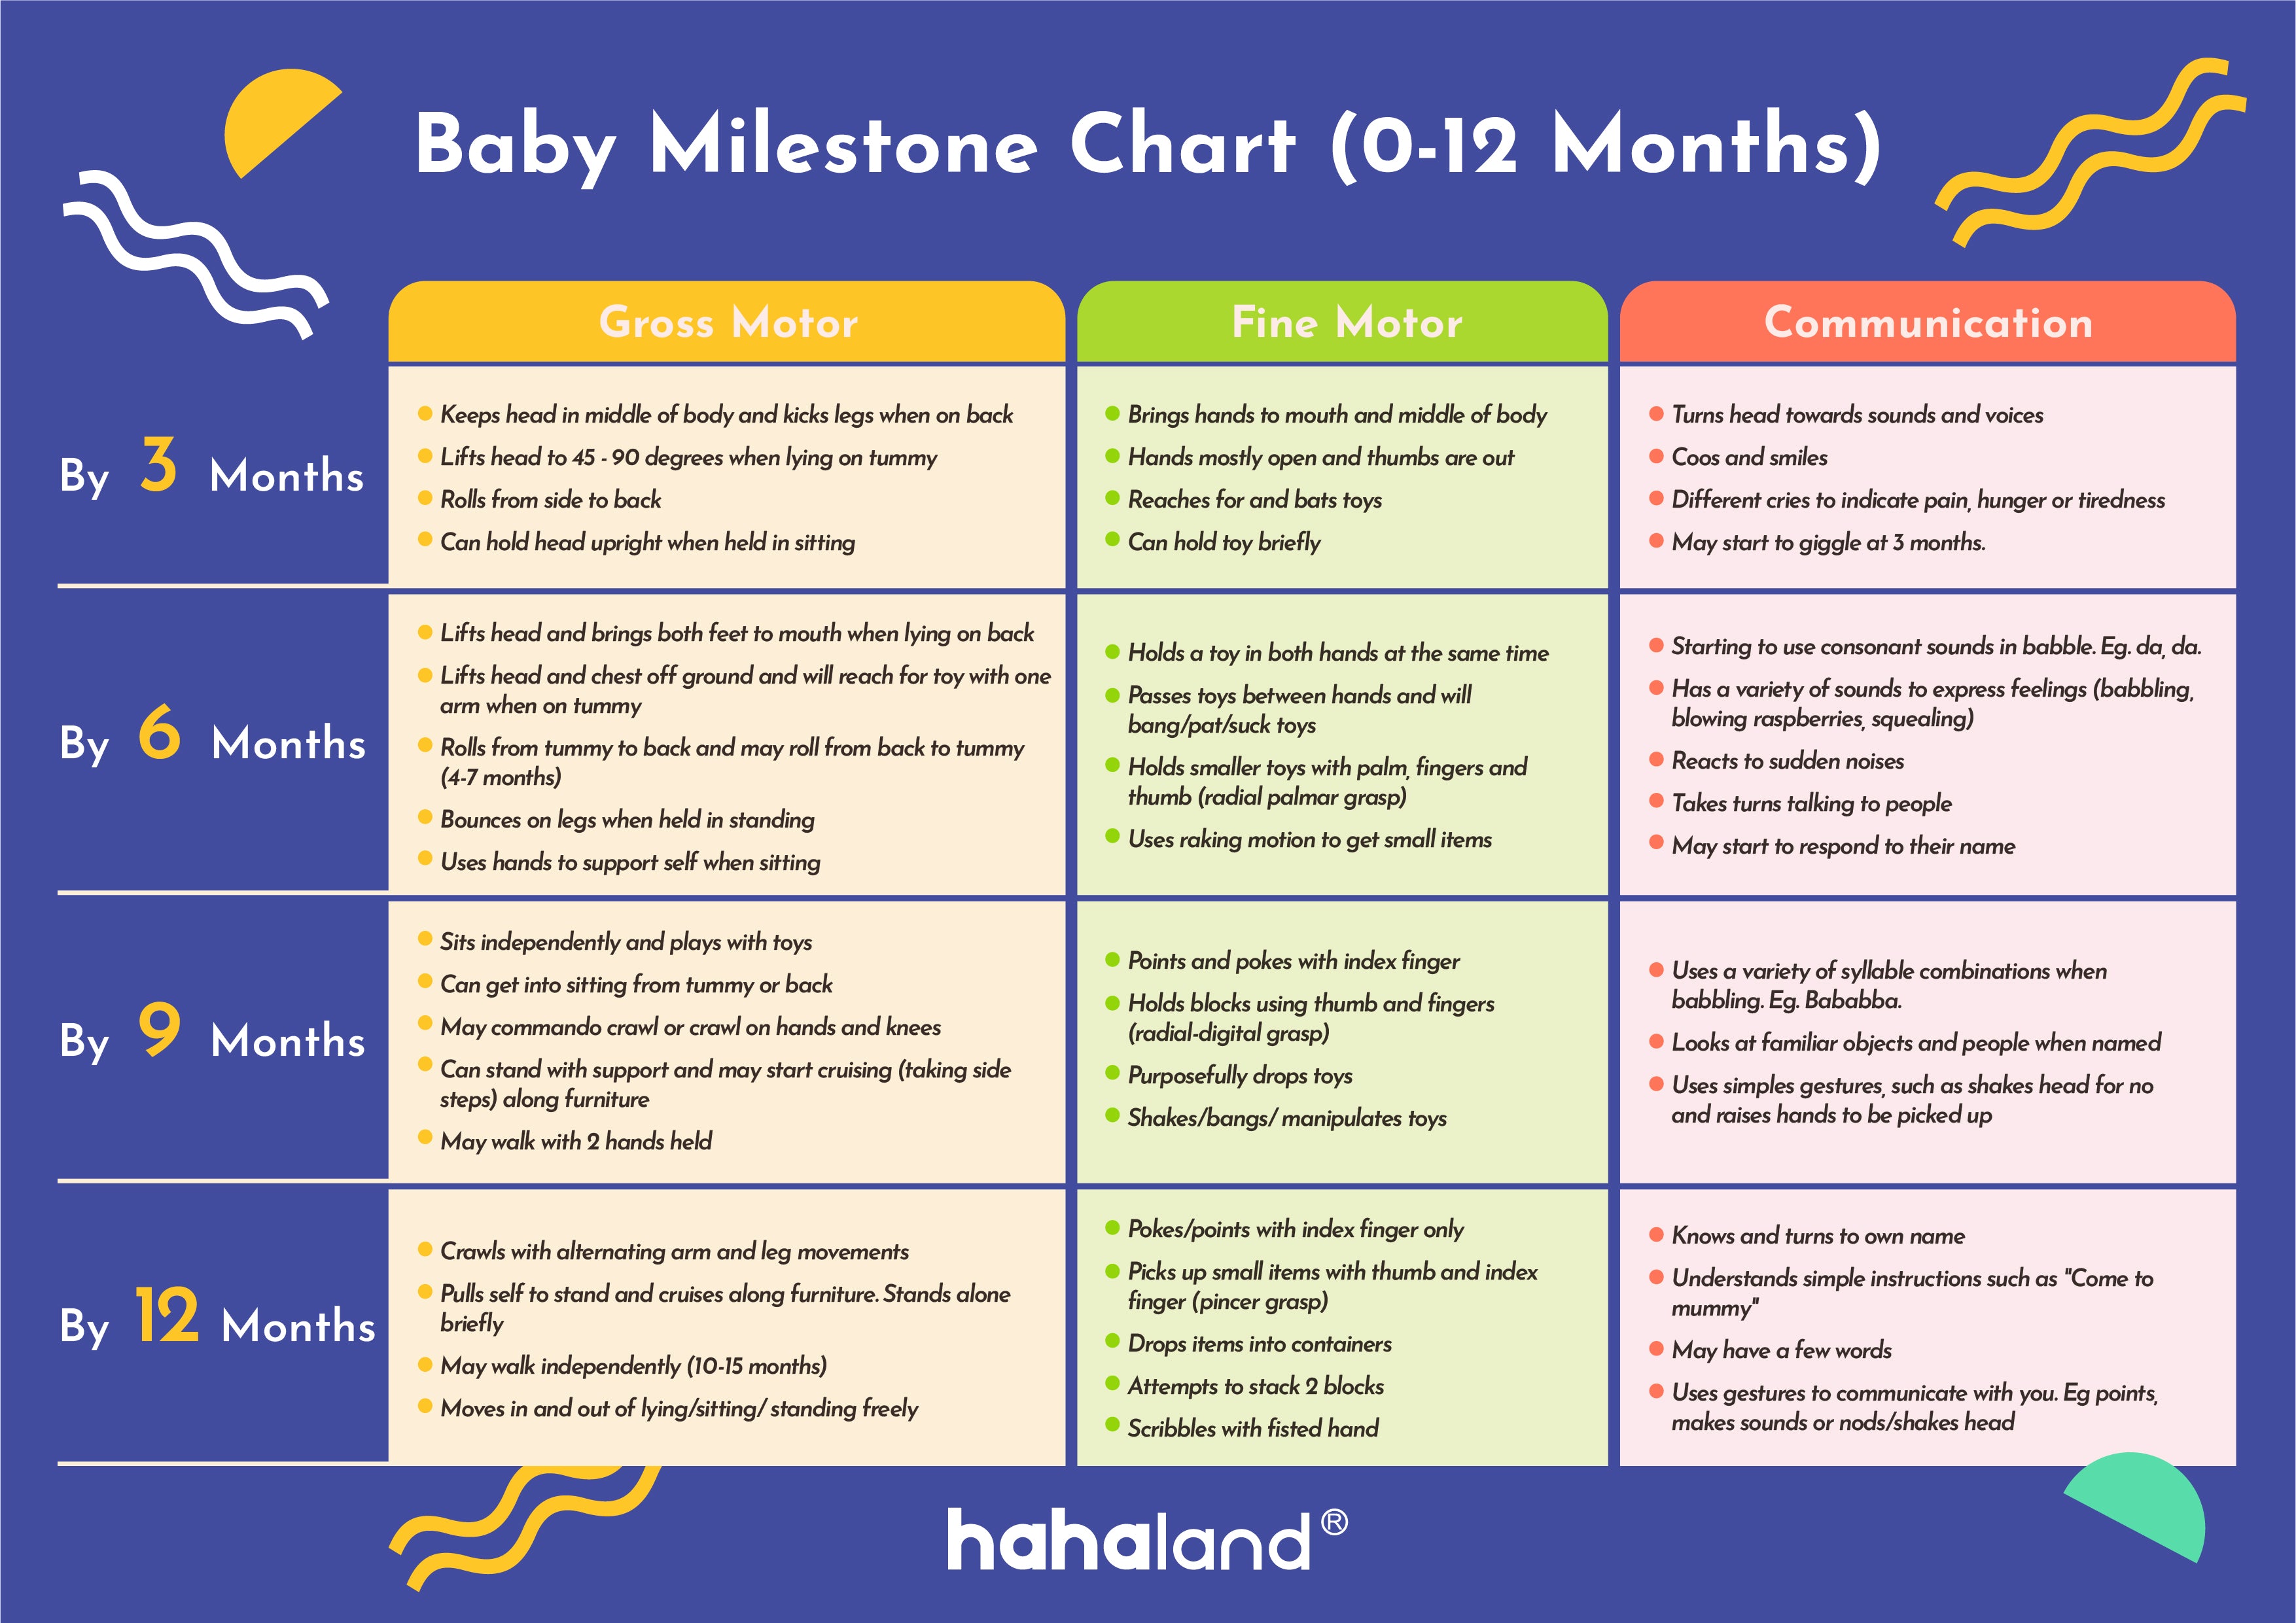 Resources for First-time Mom - Hahaland